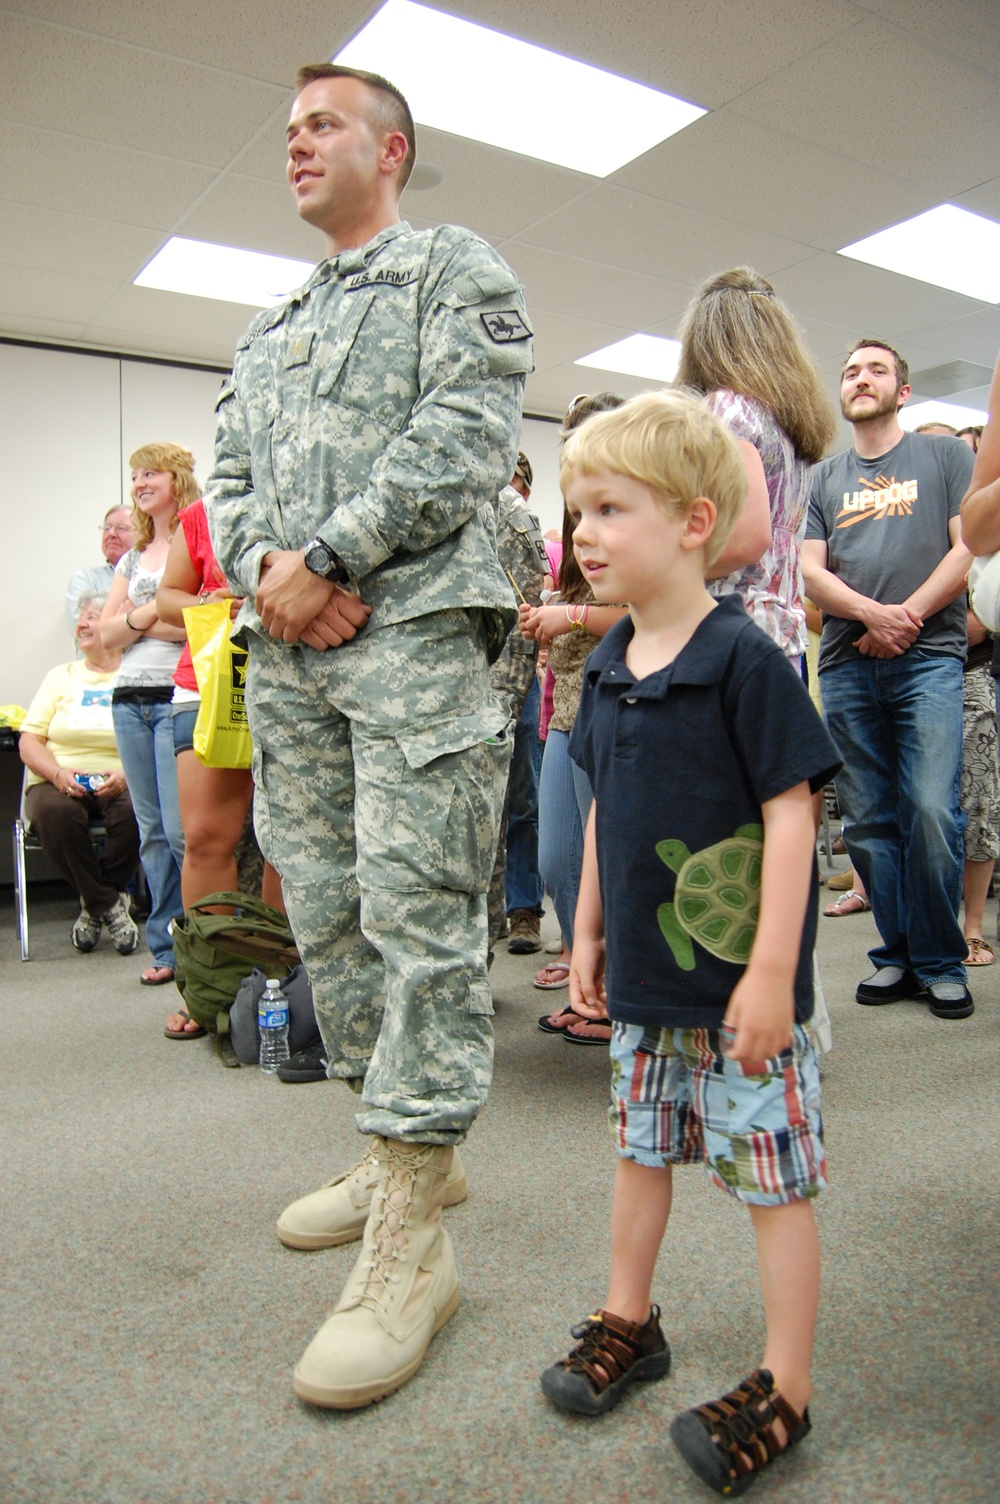 Families Welcome Home Soldiers